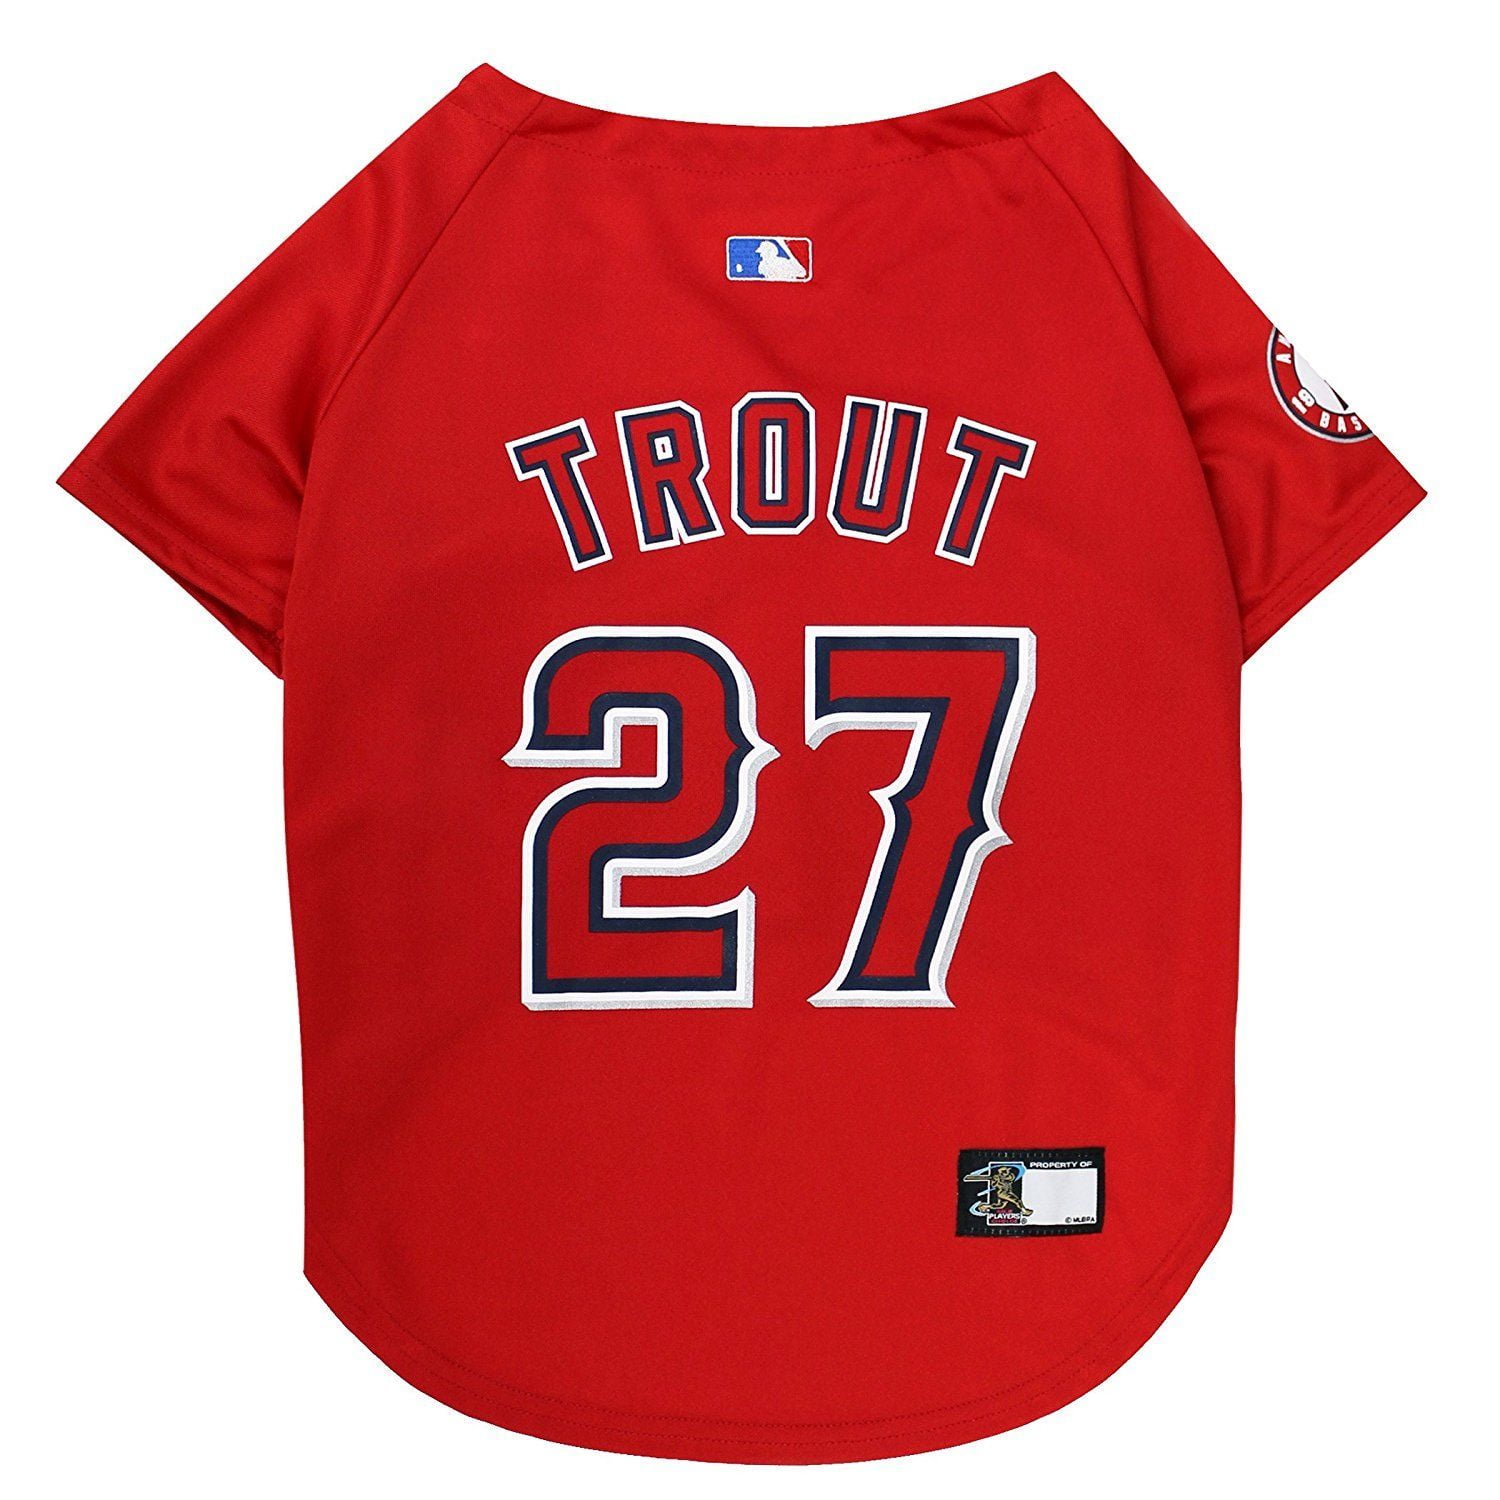 mike trout jersey youth xl